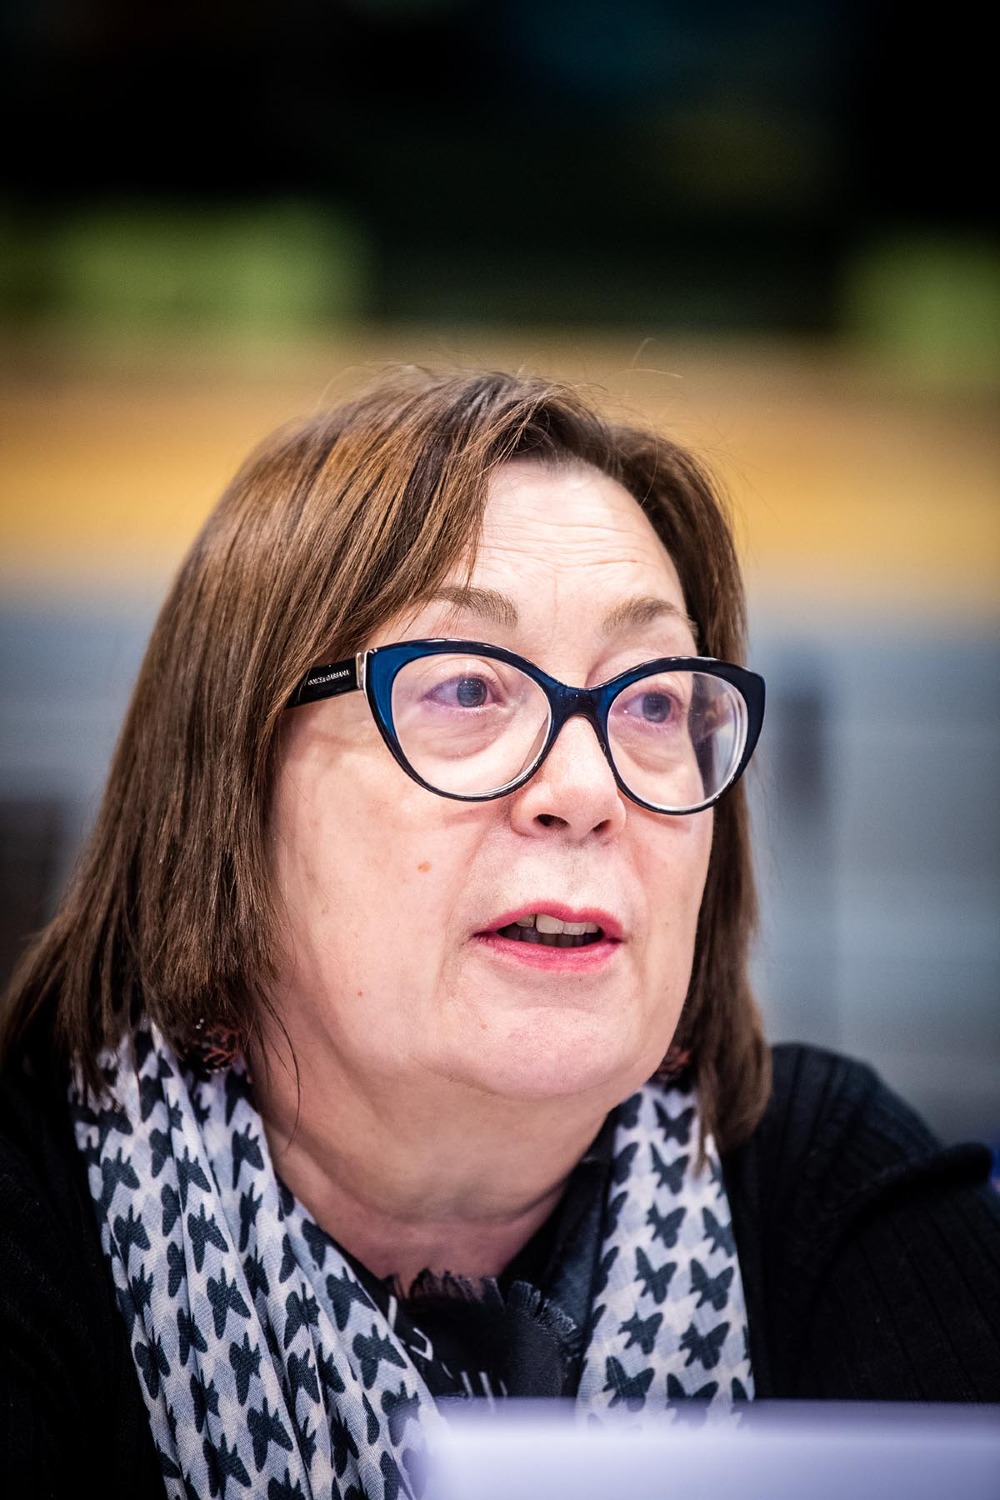 ETUC deputy general secretary, Esther Lynch said that pay justice was urgently needed for women who worked on the frontline during the Covid-19 crisis in systematically undervalued caring and cleaning jobs.